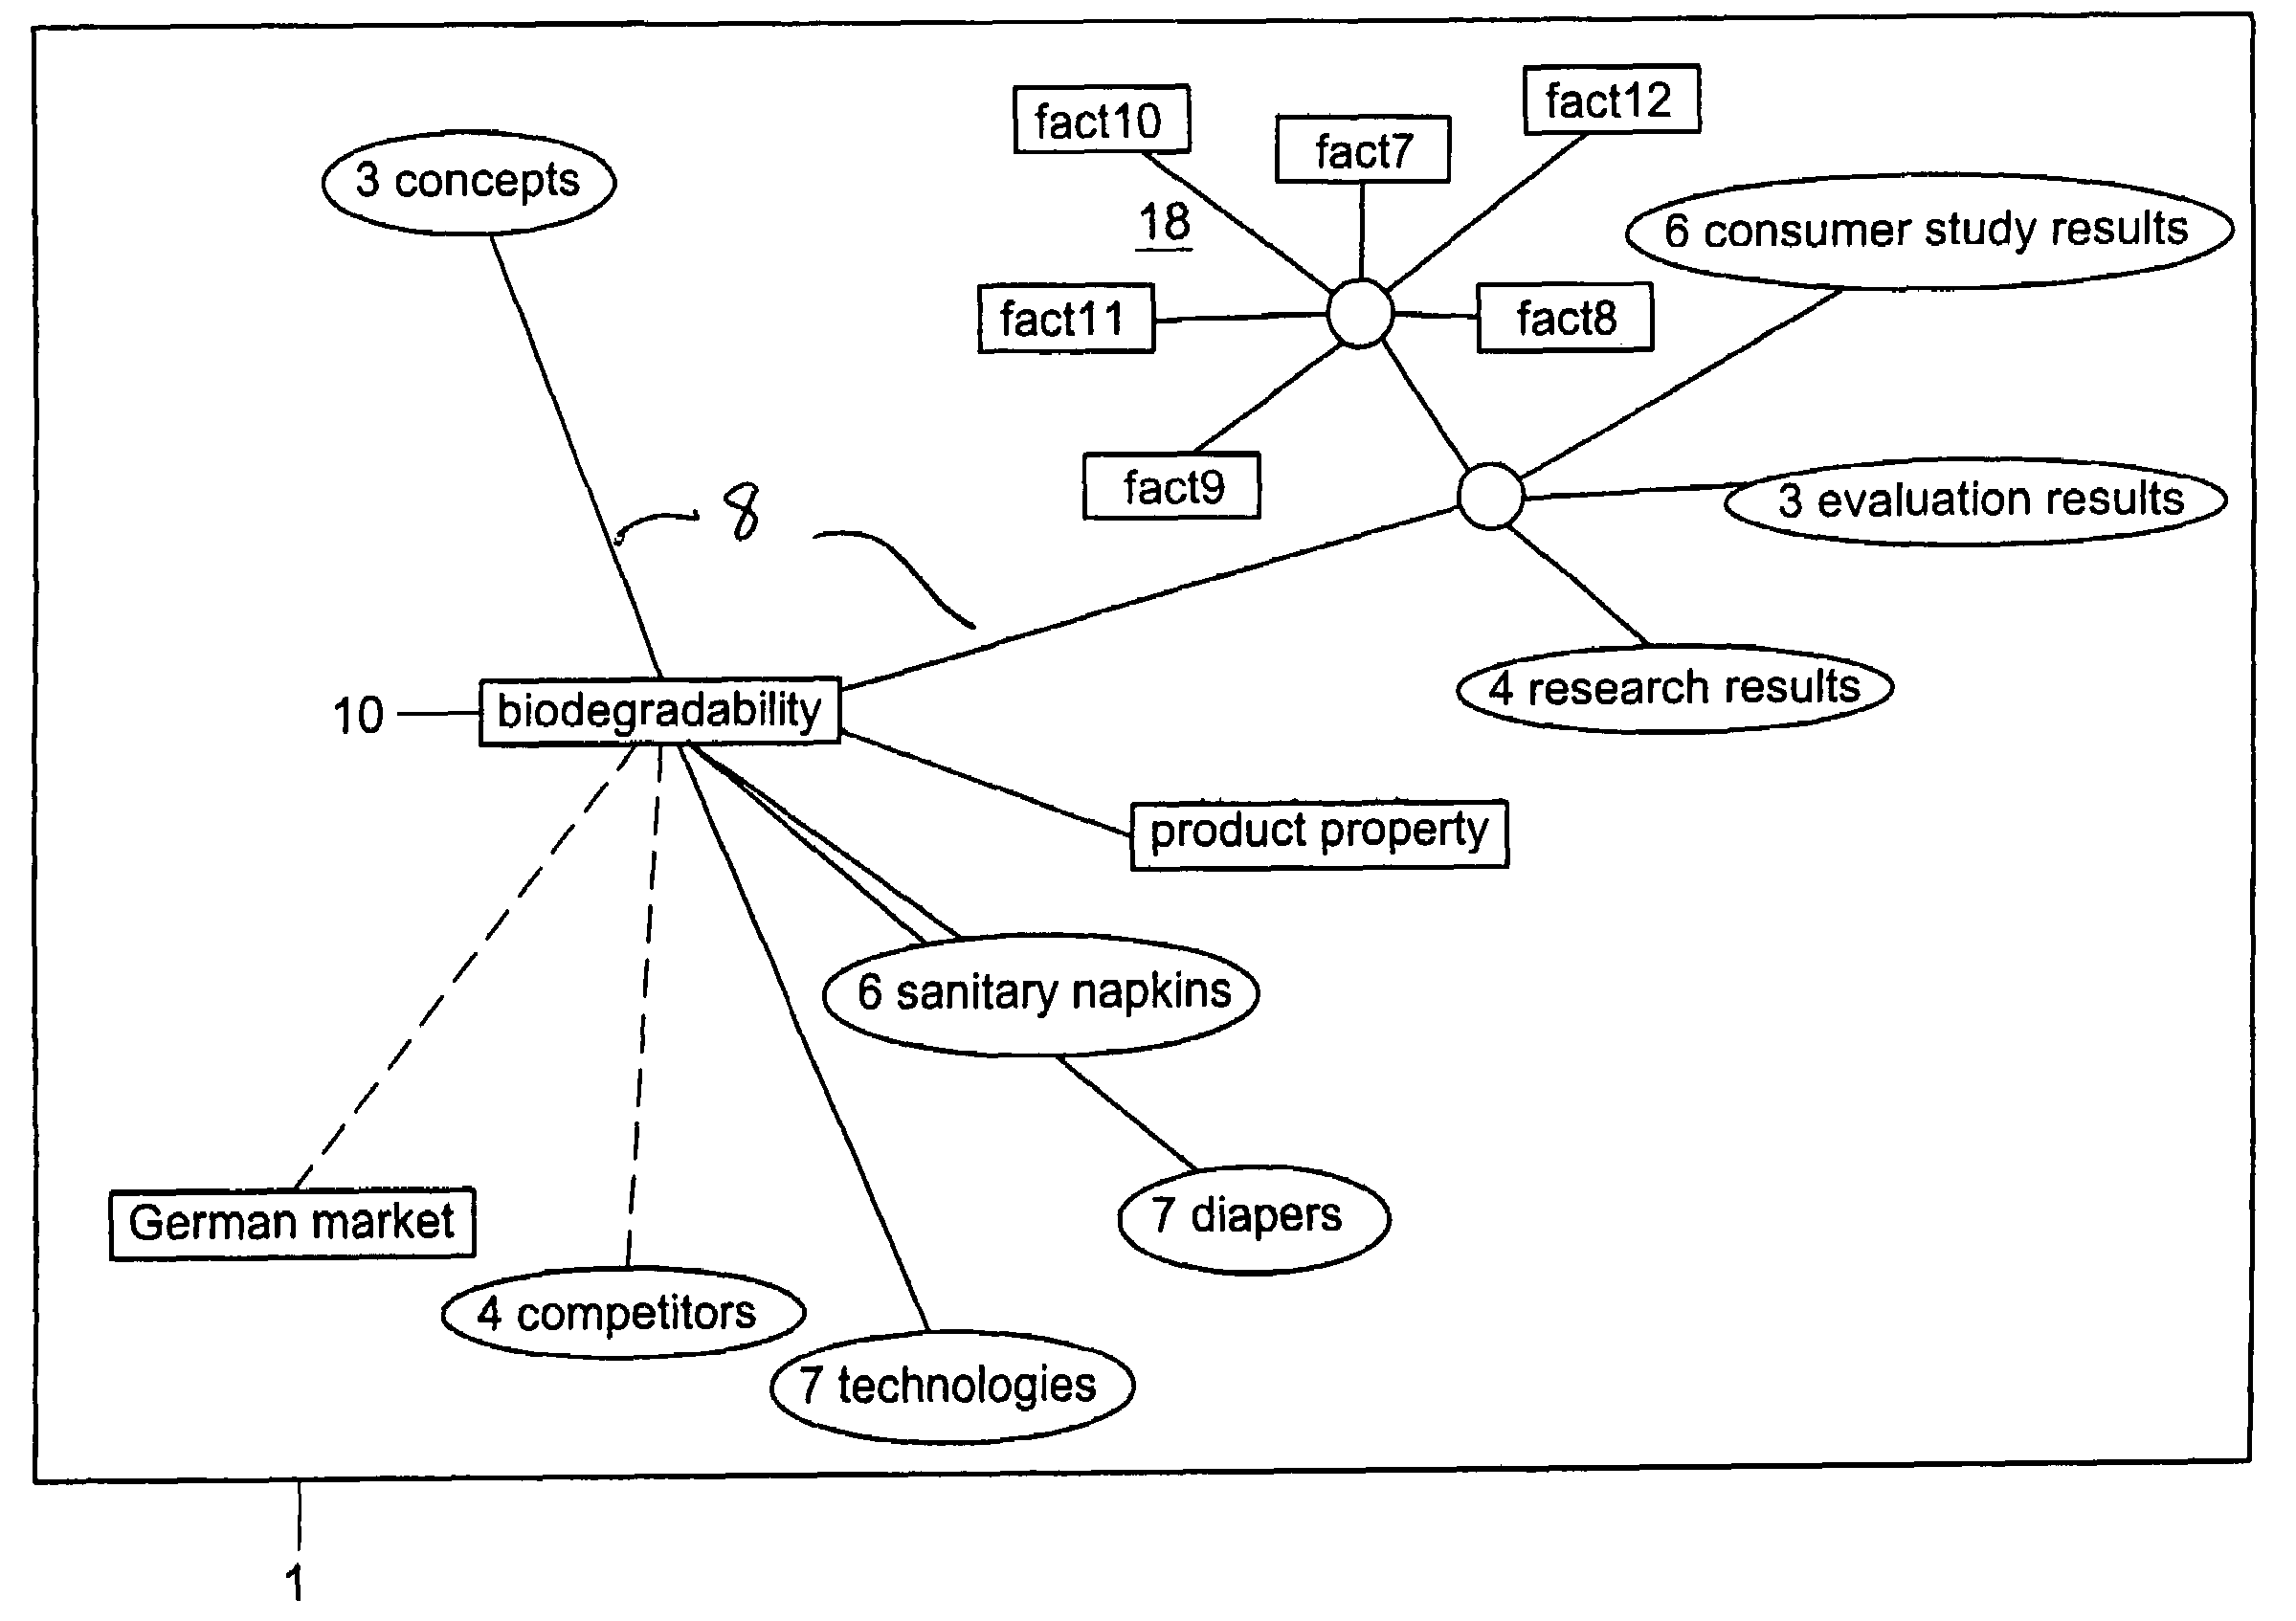 Method and system for providing an invisible attractor in a predetermined sector, which attracts a subset of entities depending on an entity type